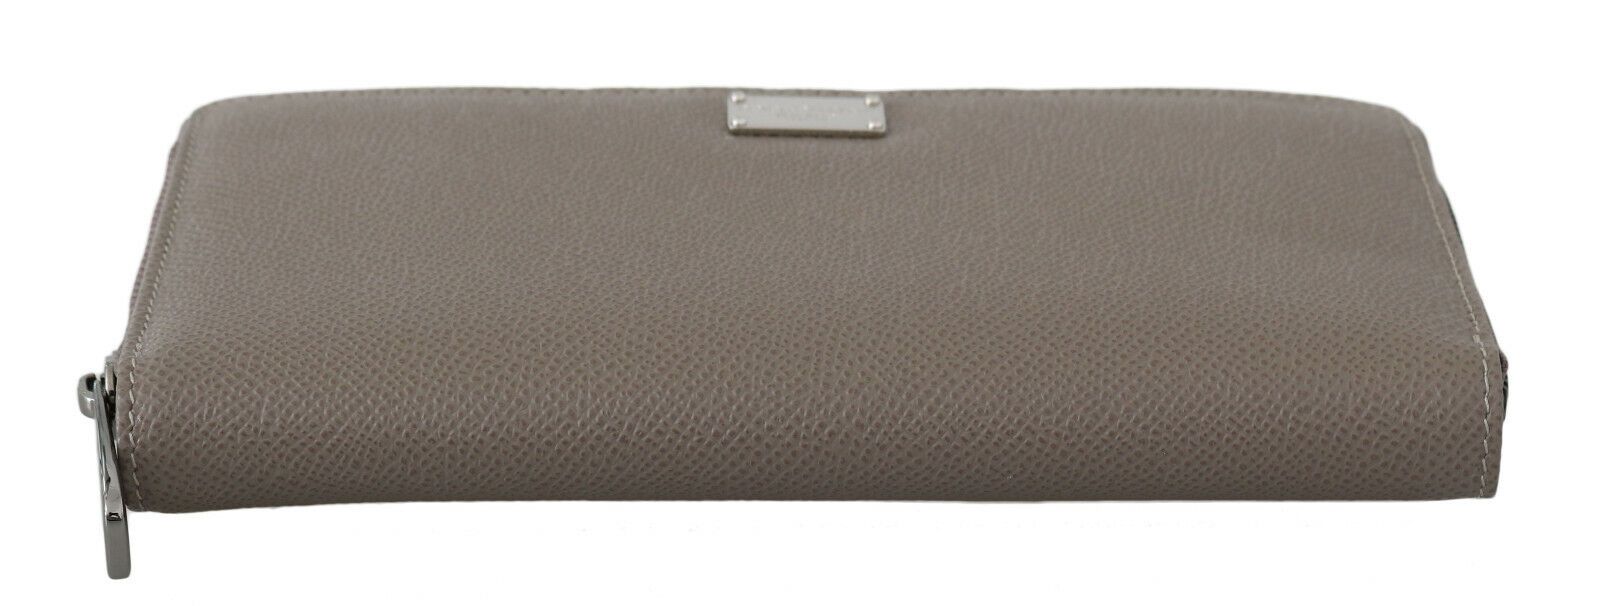 a gray purse with a metal handle on a white background